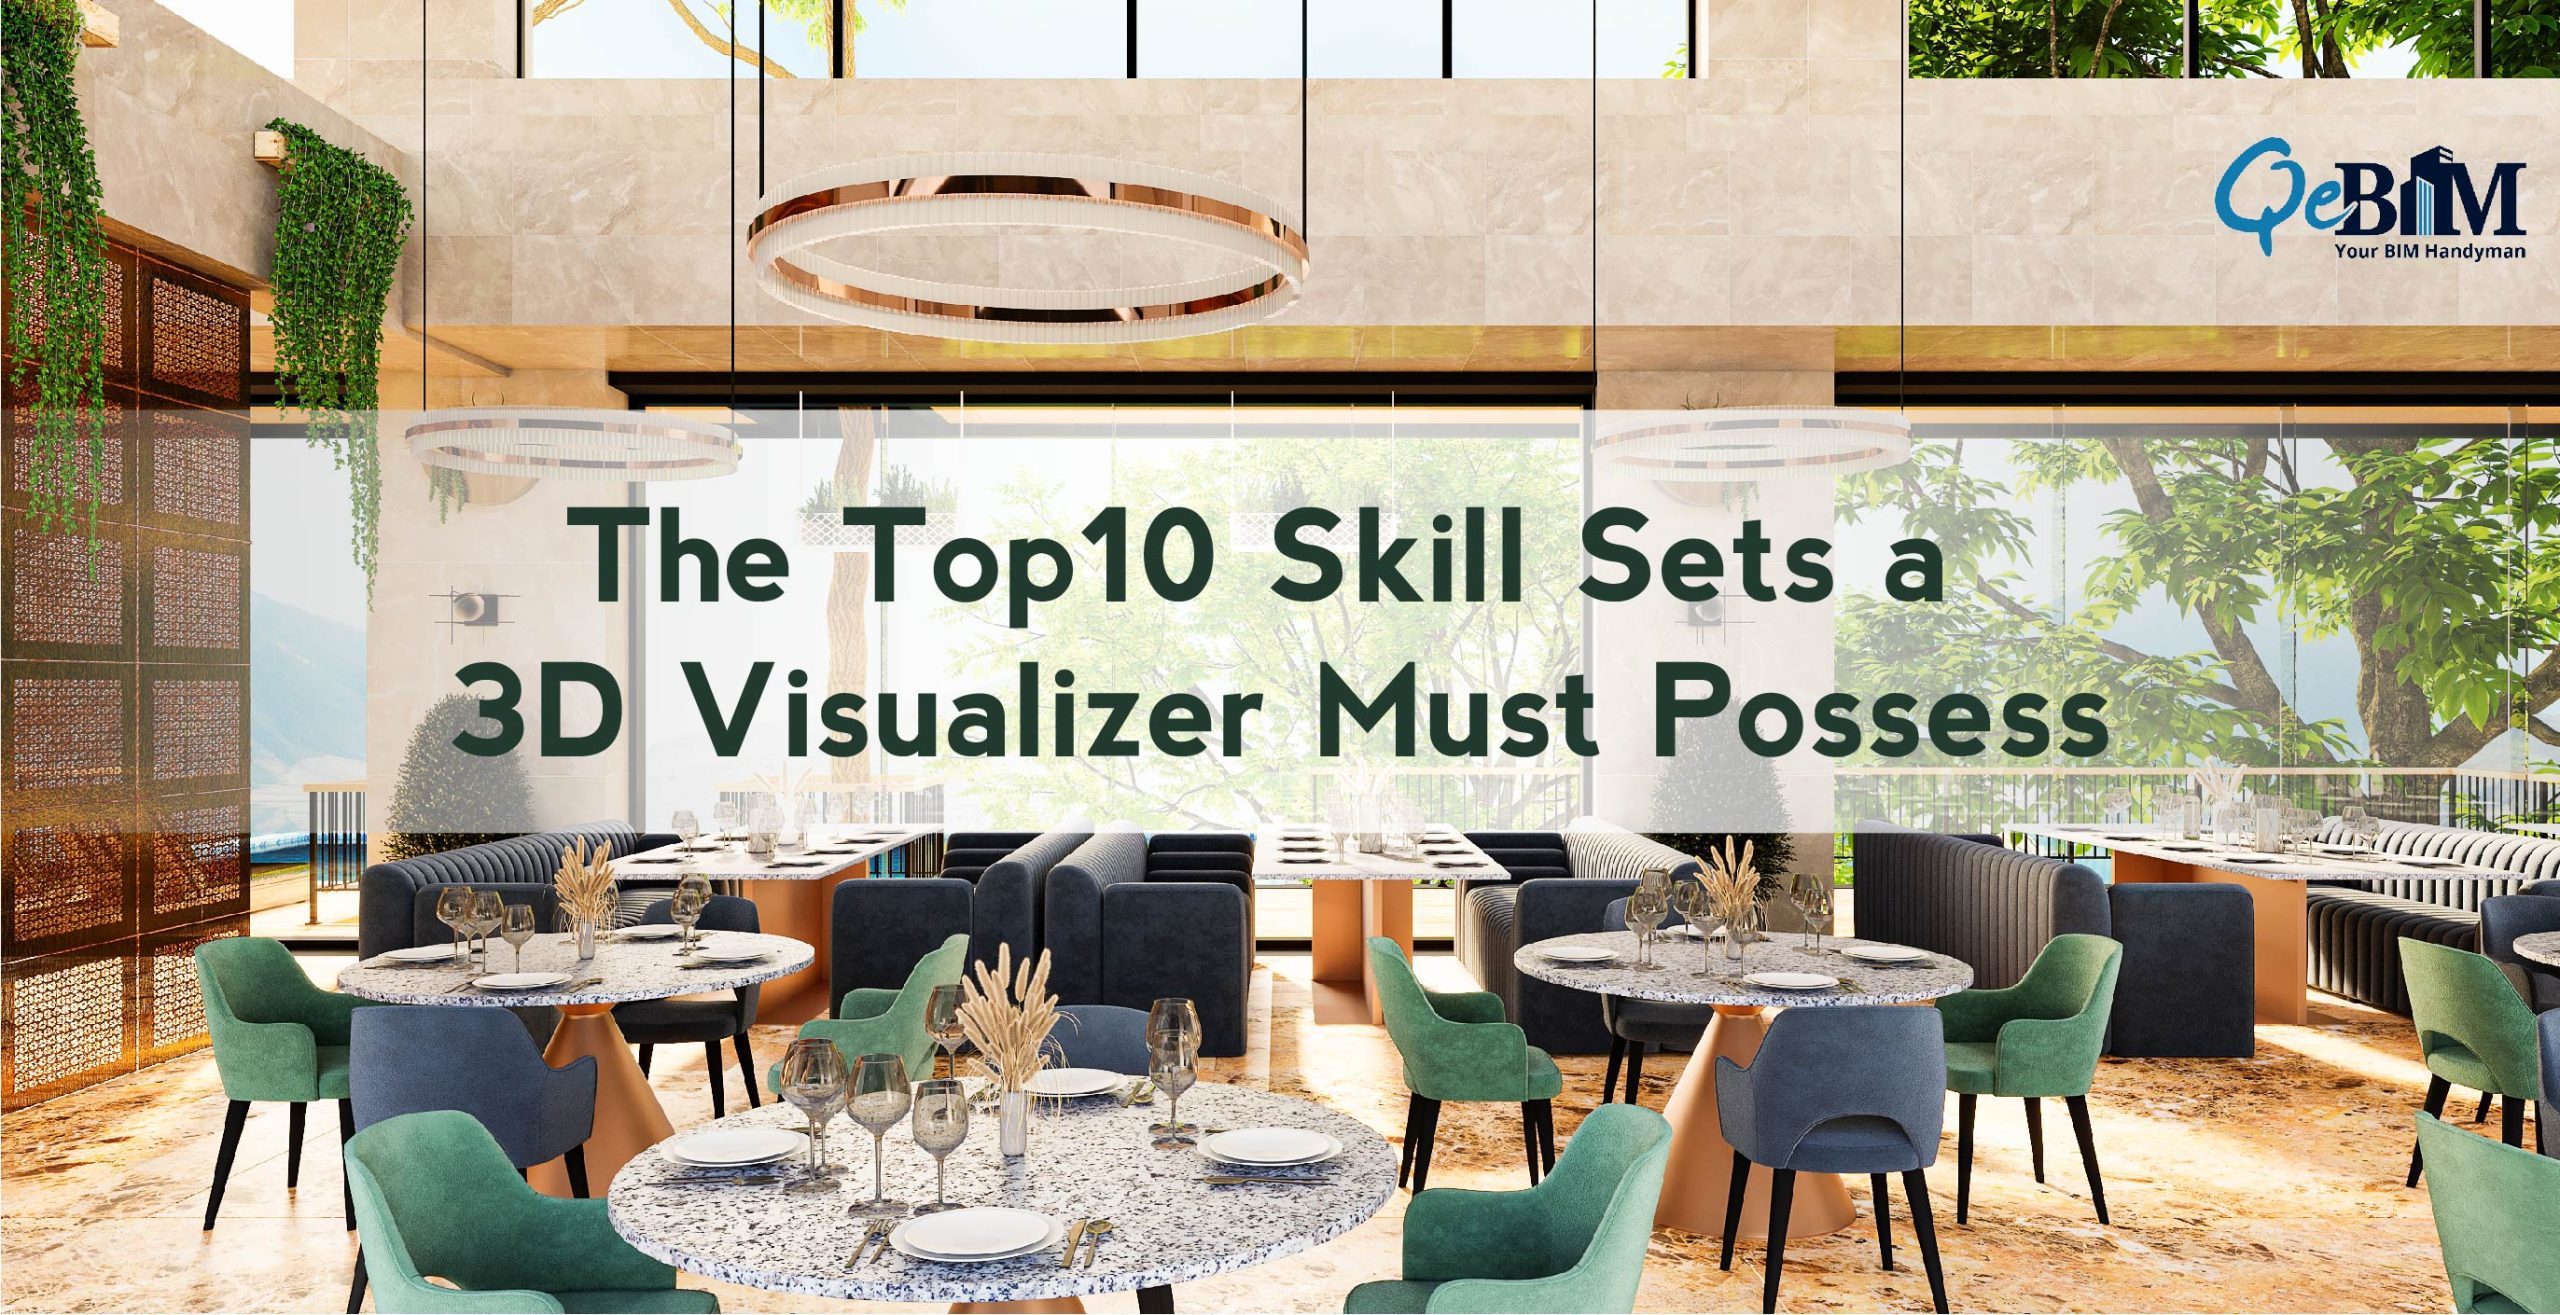 The Top10 Skill Sets a 3D Visualizer Must Possess